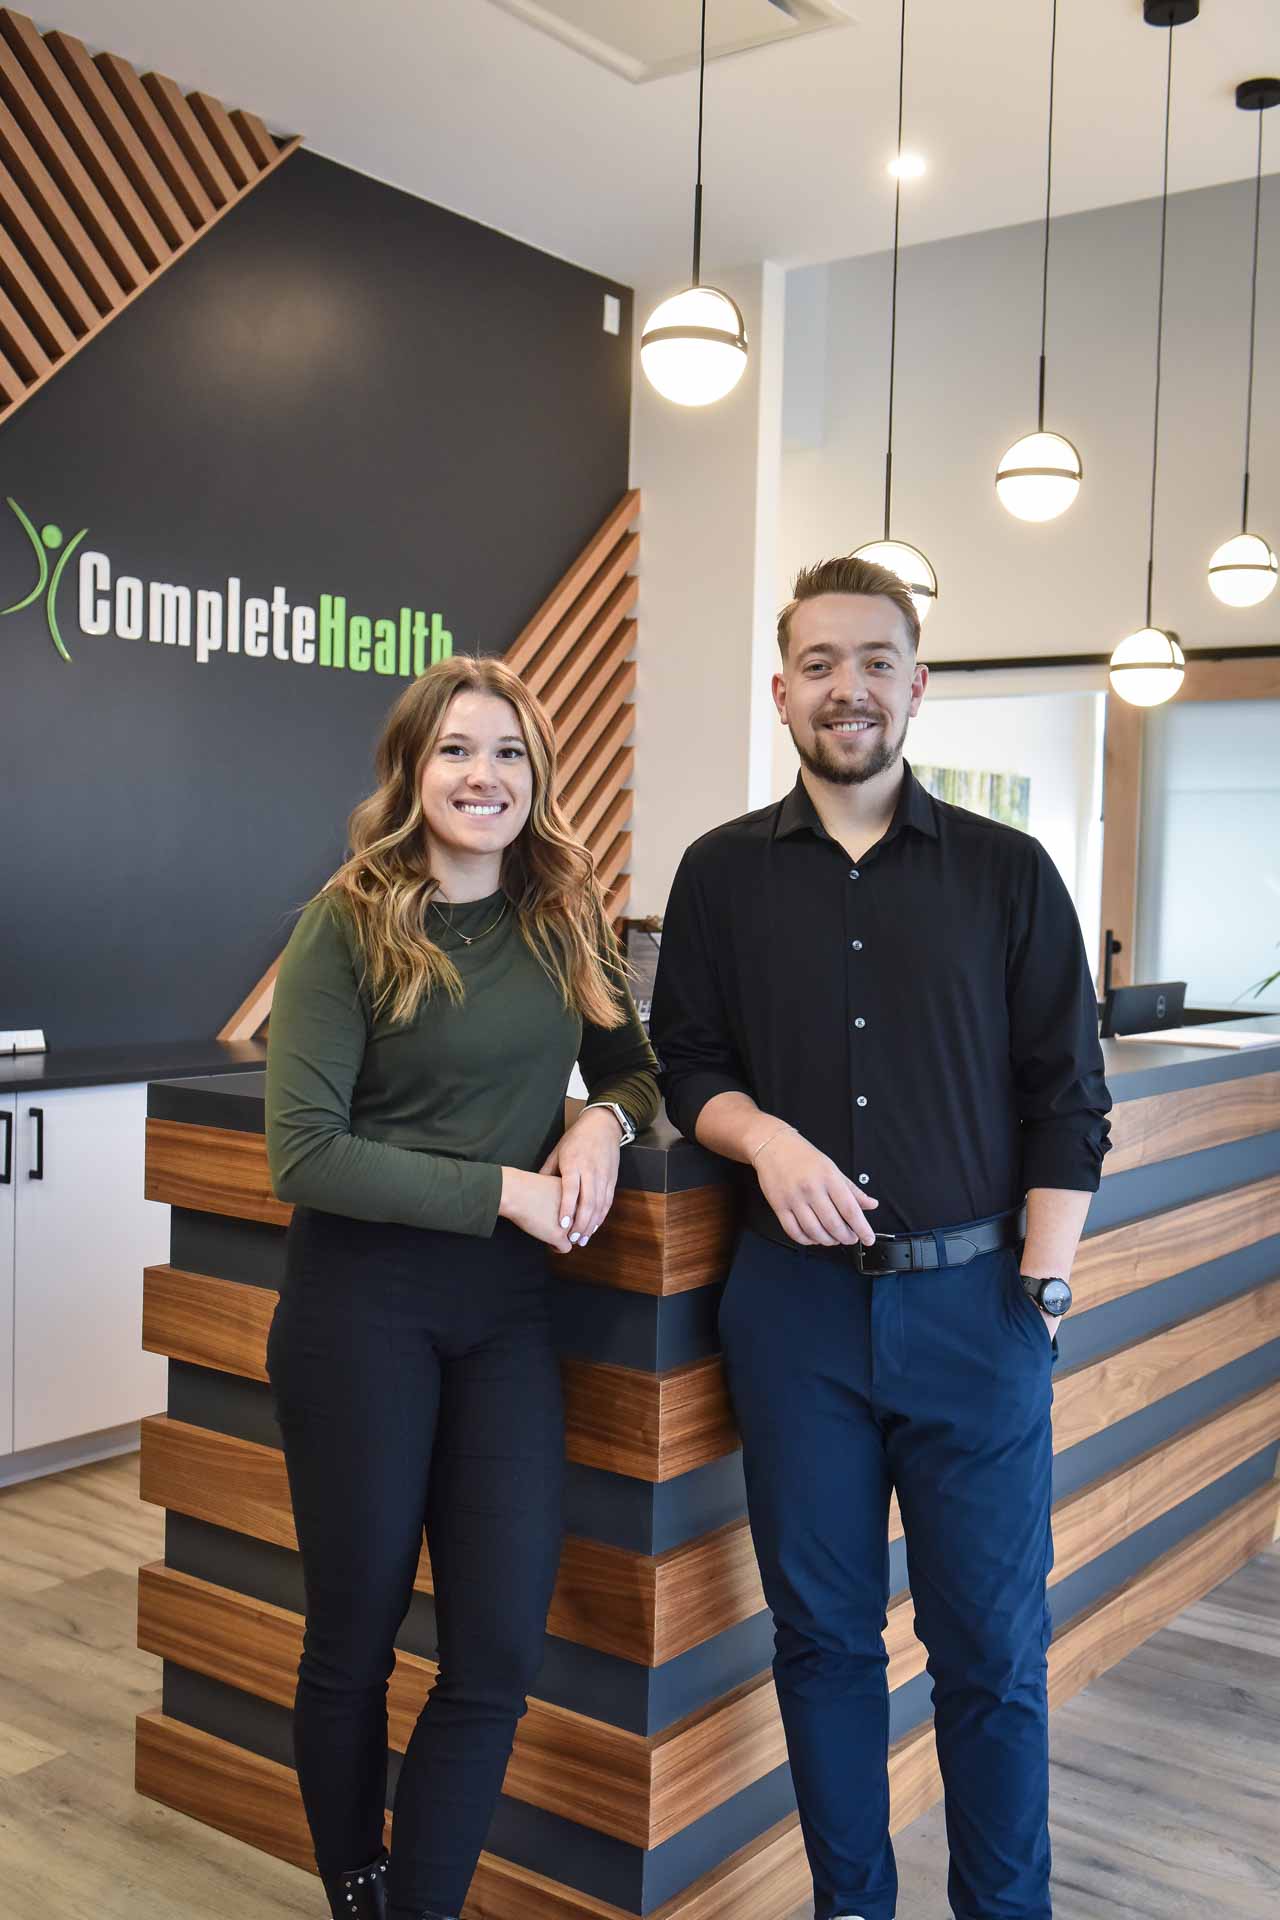 Dr. Jaycee George & Dr. Carson Penner | Complete Health | Chiropractic & Wellness Center | Okotoks & SW Calgary